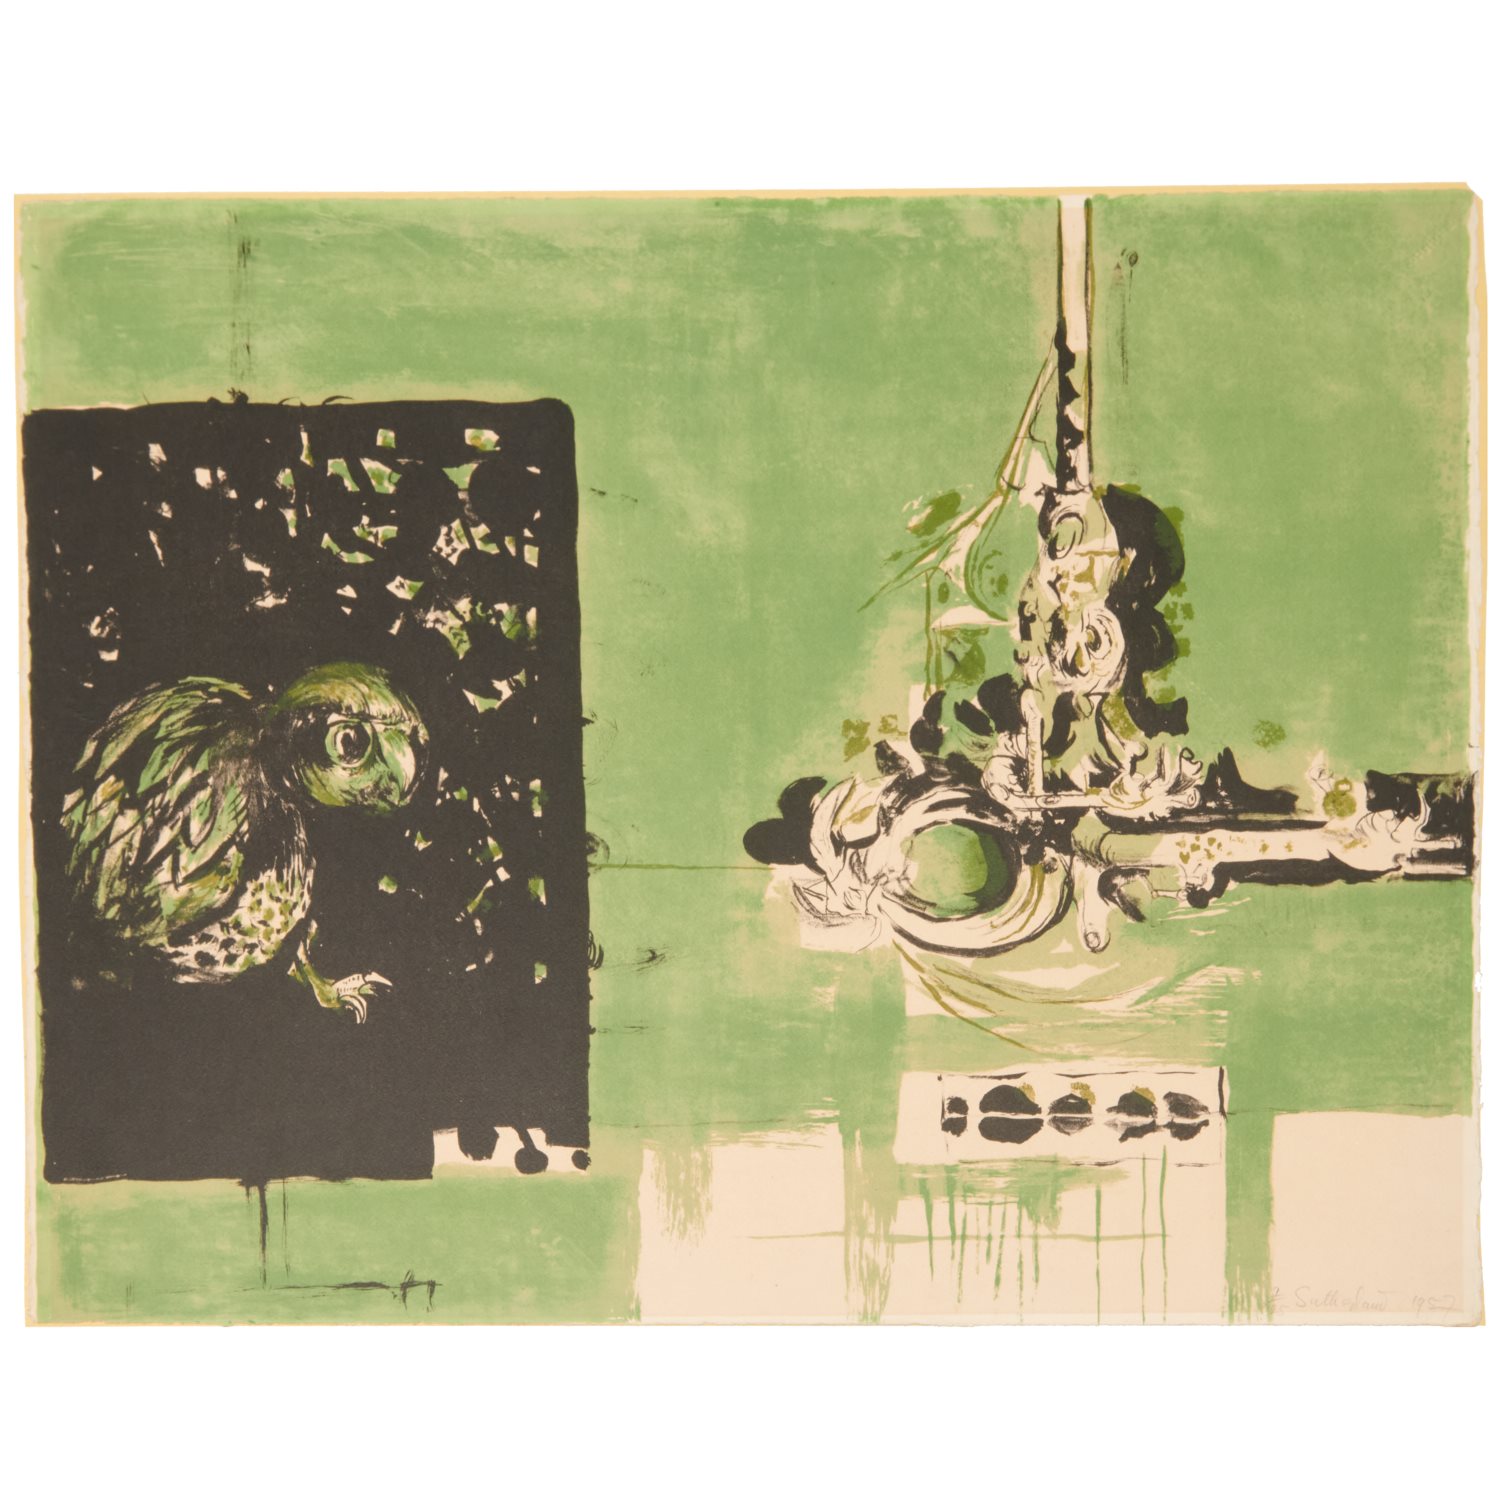 GRAHAM SUTHERLAND TWO COLOR LITHOGRAPH  2ce08a